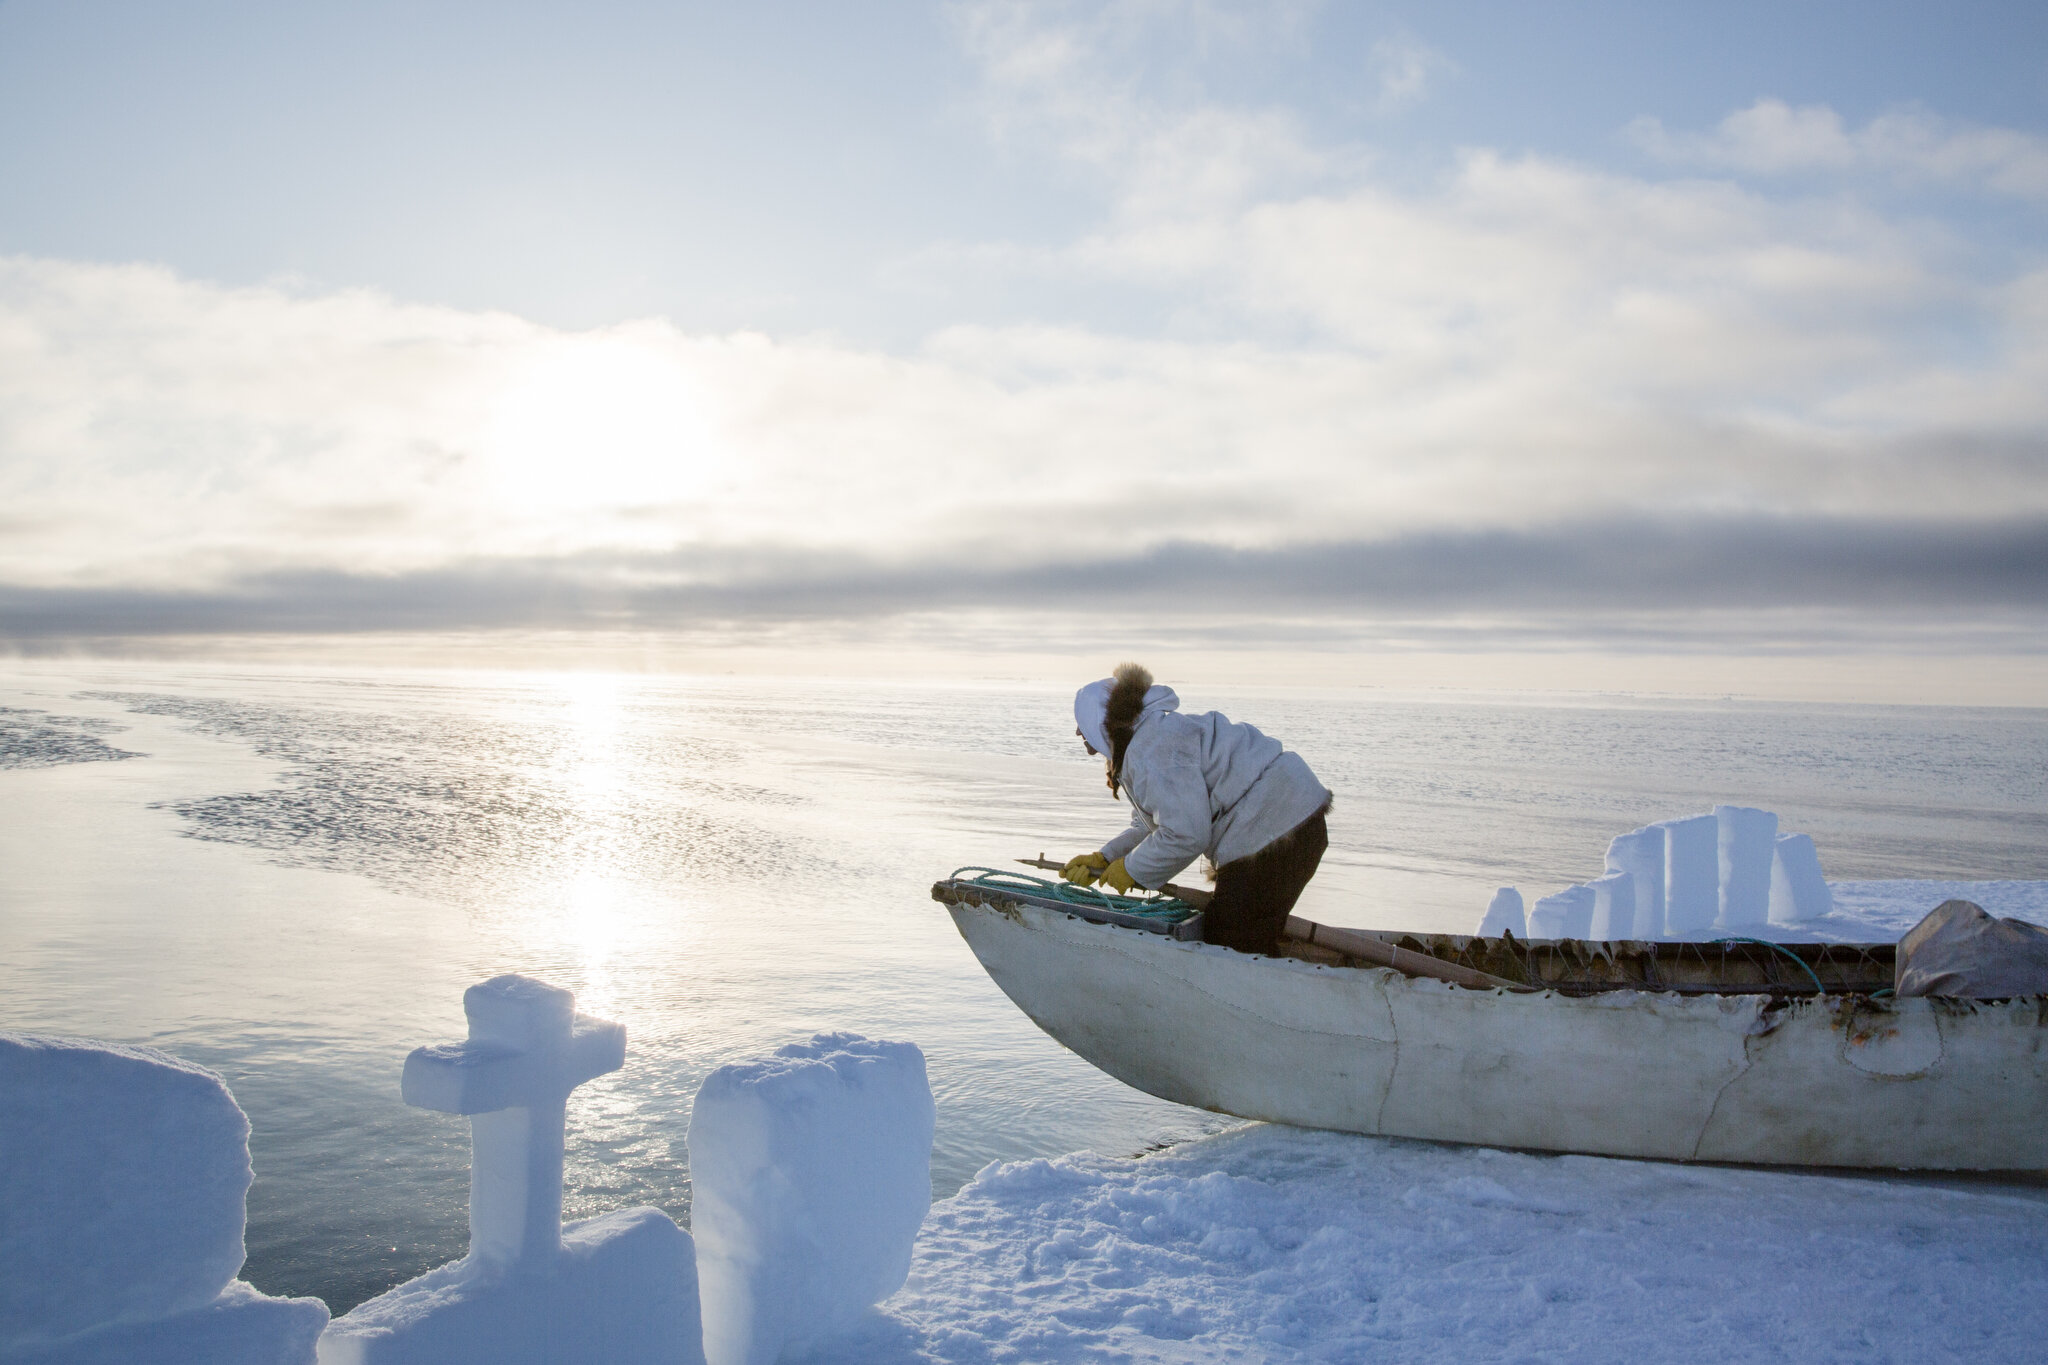  The annual spring bowhead whale hunt in Barrow, Alaska in April, 2016. Here Iñupiat harpooner and whaling captain Quincy Adams surveys the horizon for bowhead whales in a traditional sealskin canoe. Together with his crew, he camps out on the sea ic